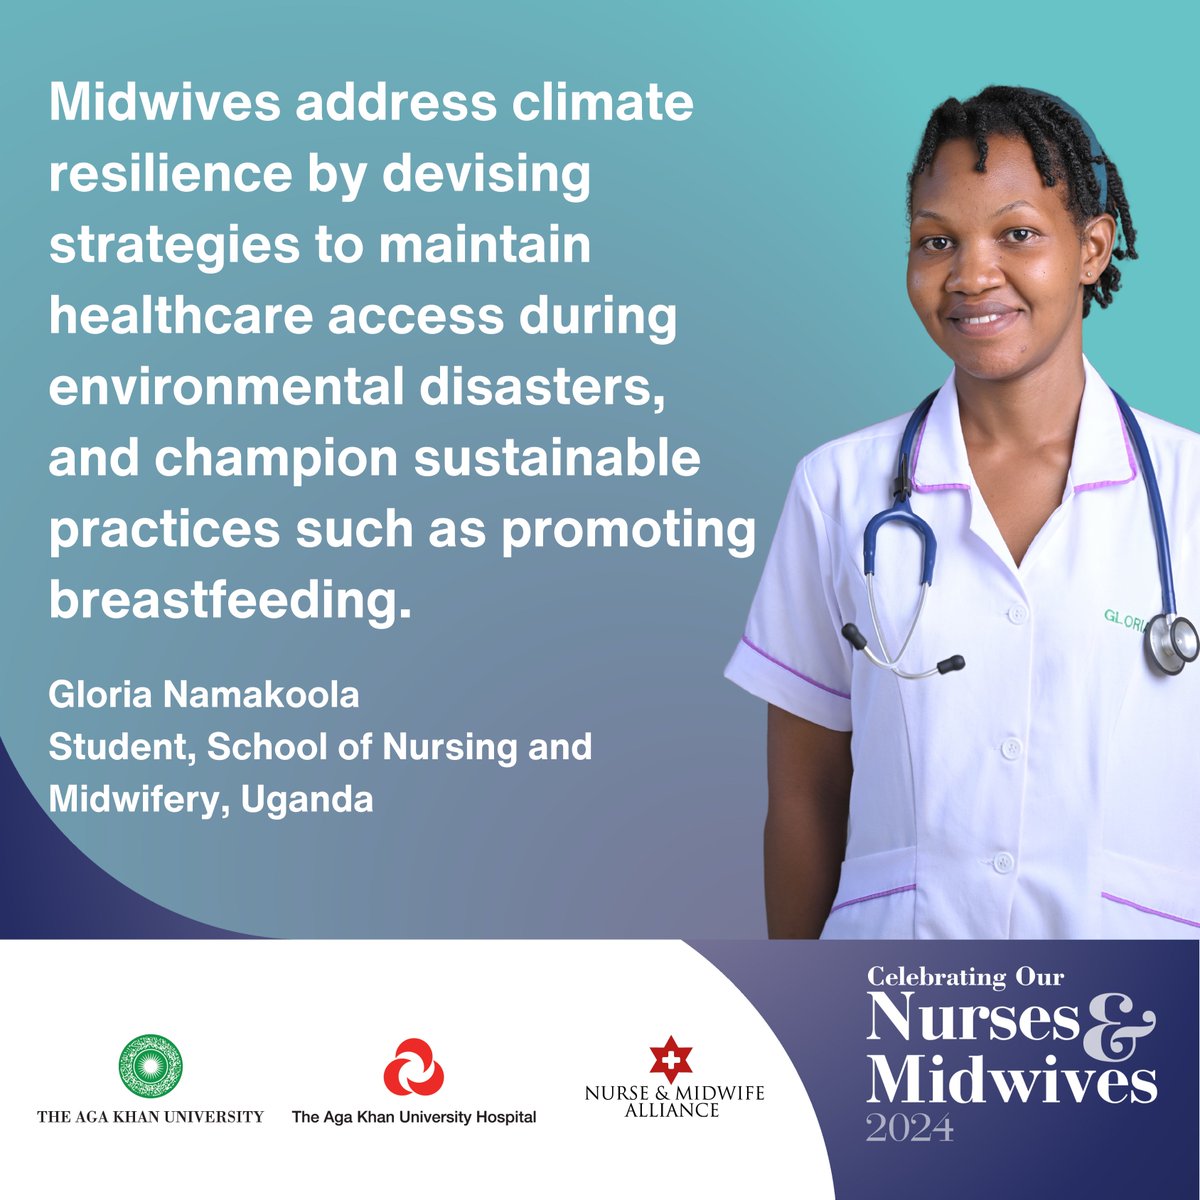 Midwives embody a commitment to equitable and sustainable healthcare that leaves no one behind during environmental disasters - Gloria Namakoola

#IDM2024 #MidwivesAndClimate​ #InternationalMidwivesDay